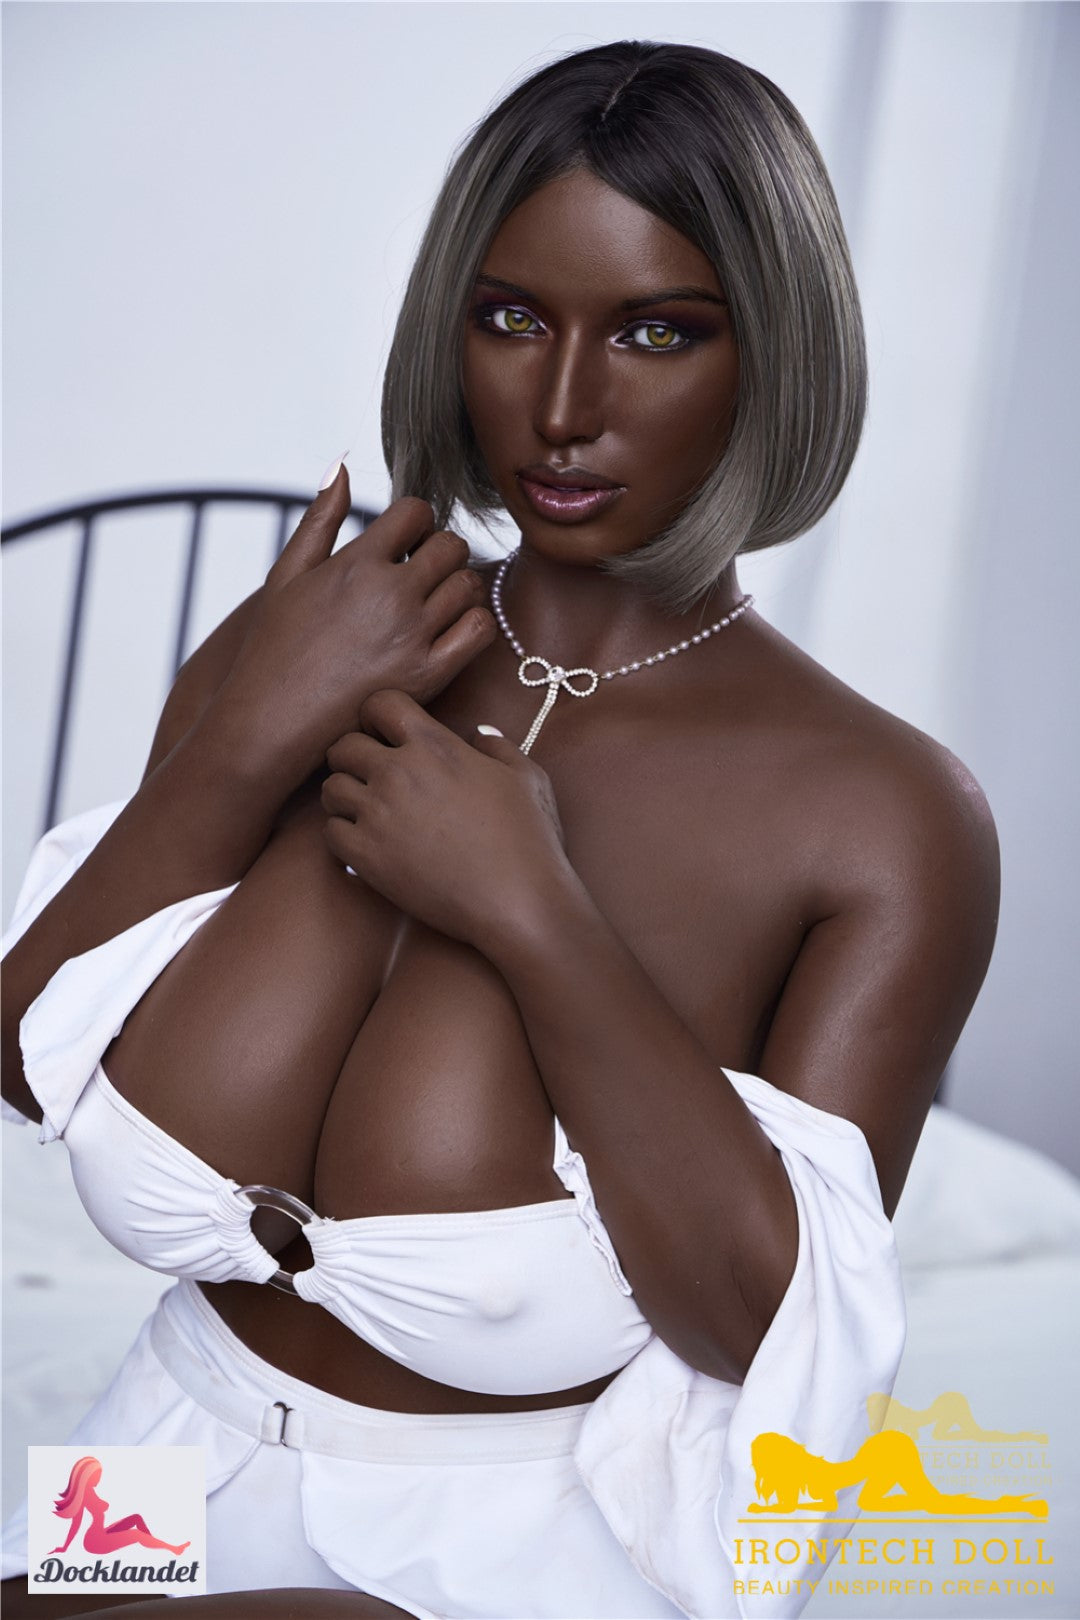 Kalifa Sex Doll (Irontech Doll 160 cm h-cup S28 silikoni)